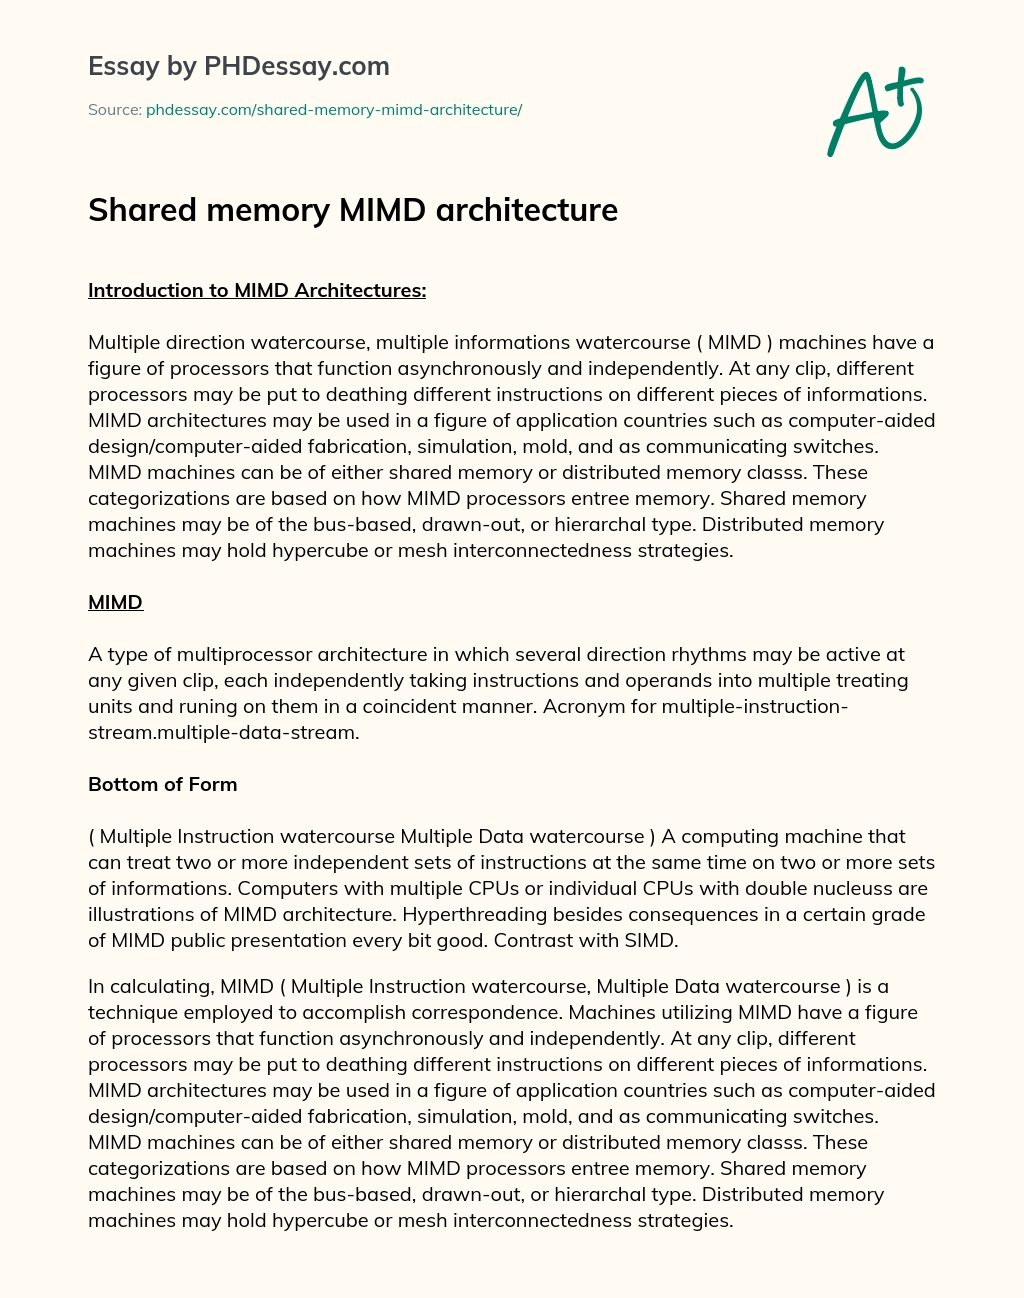 Shared memory MIMD architecture essay